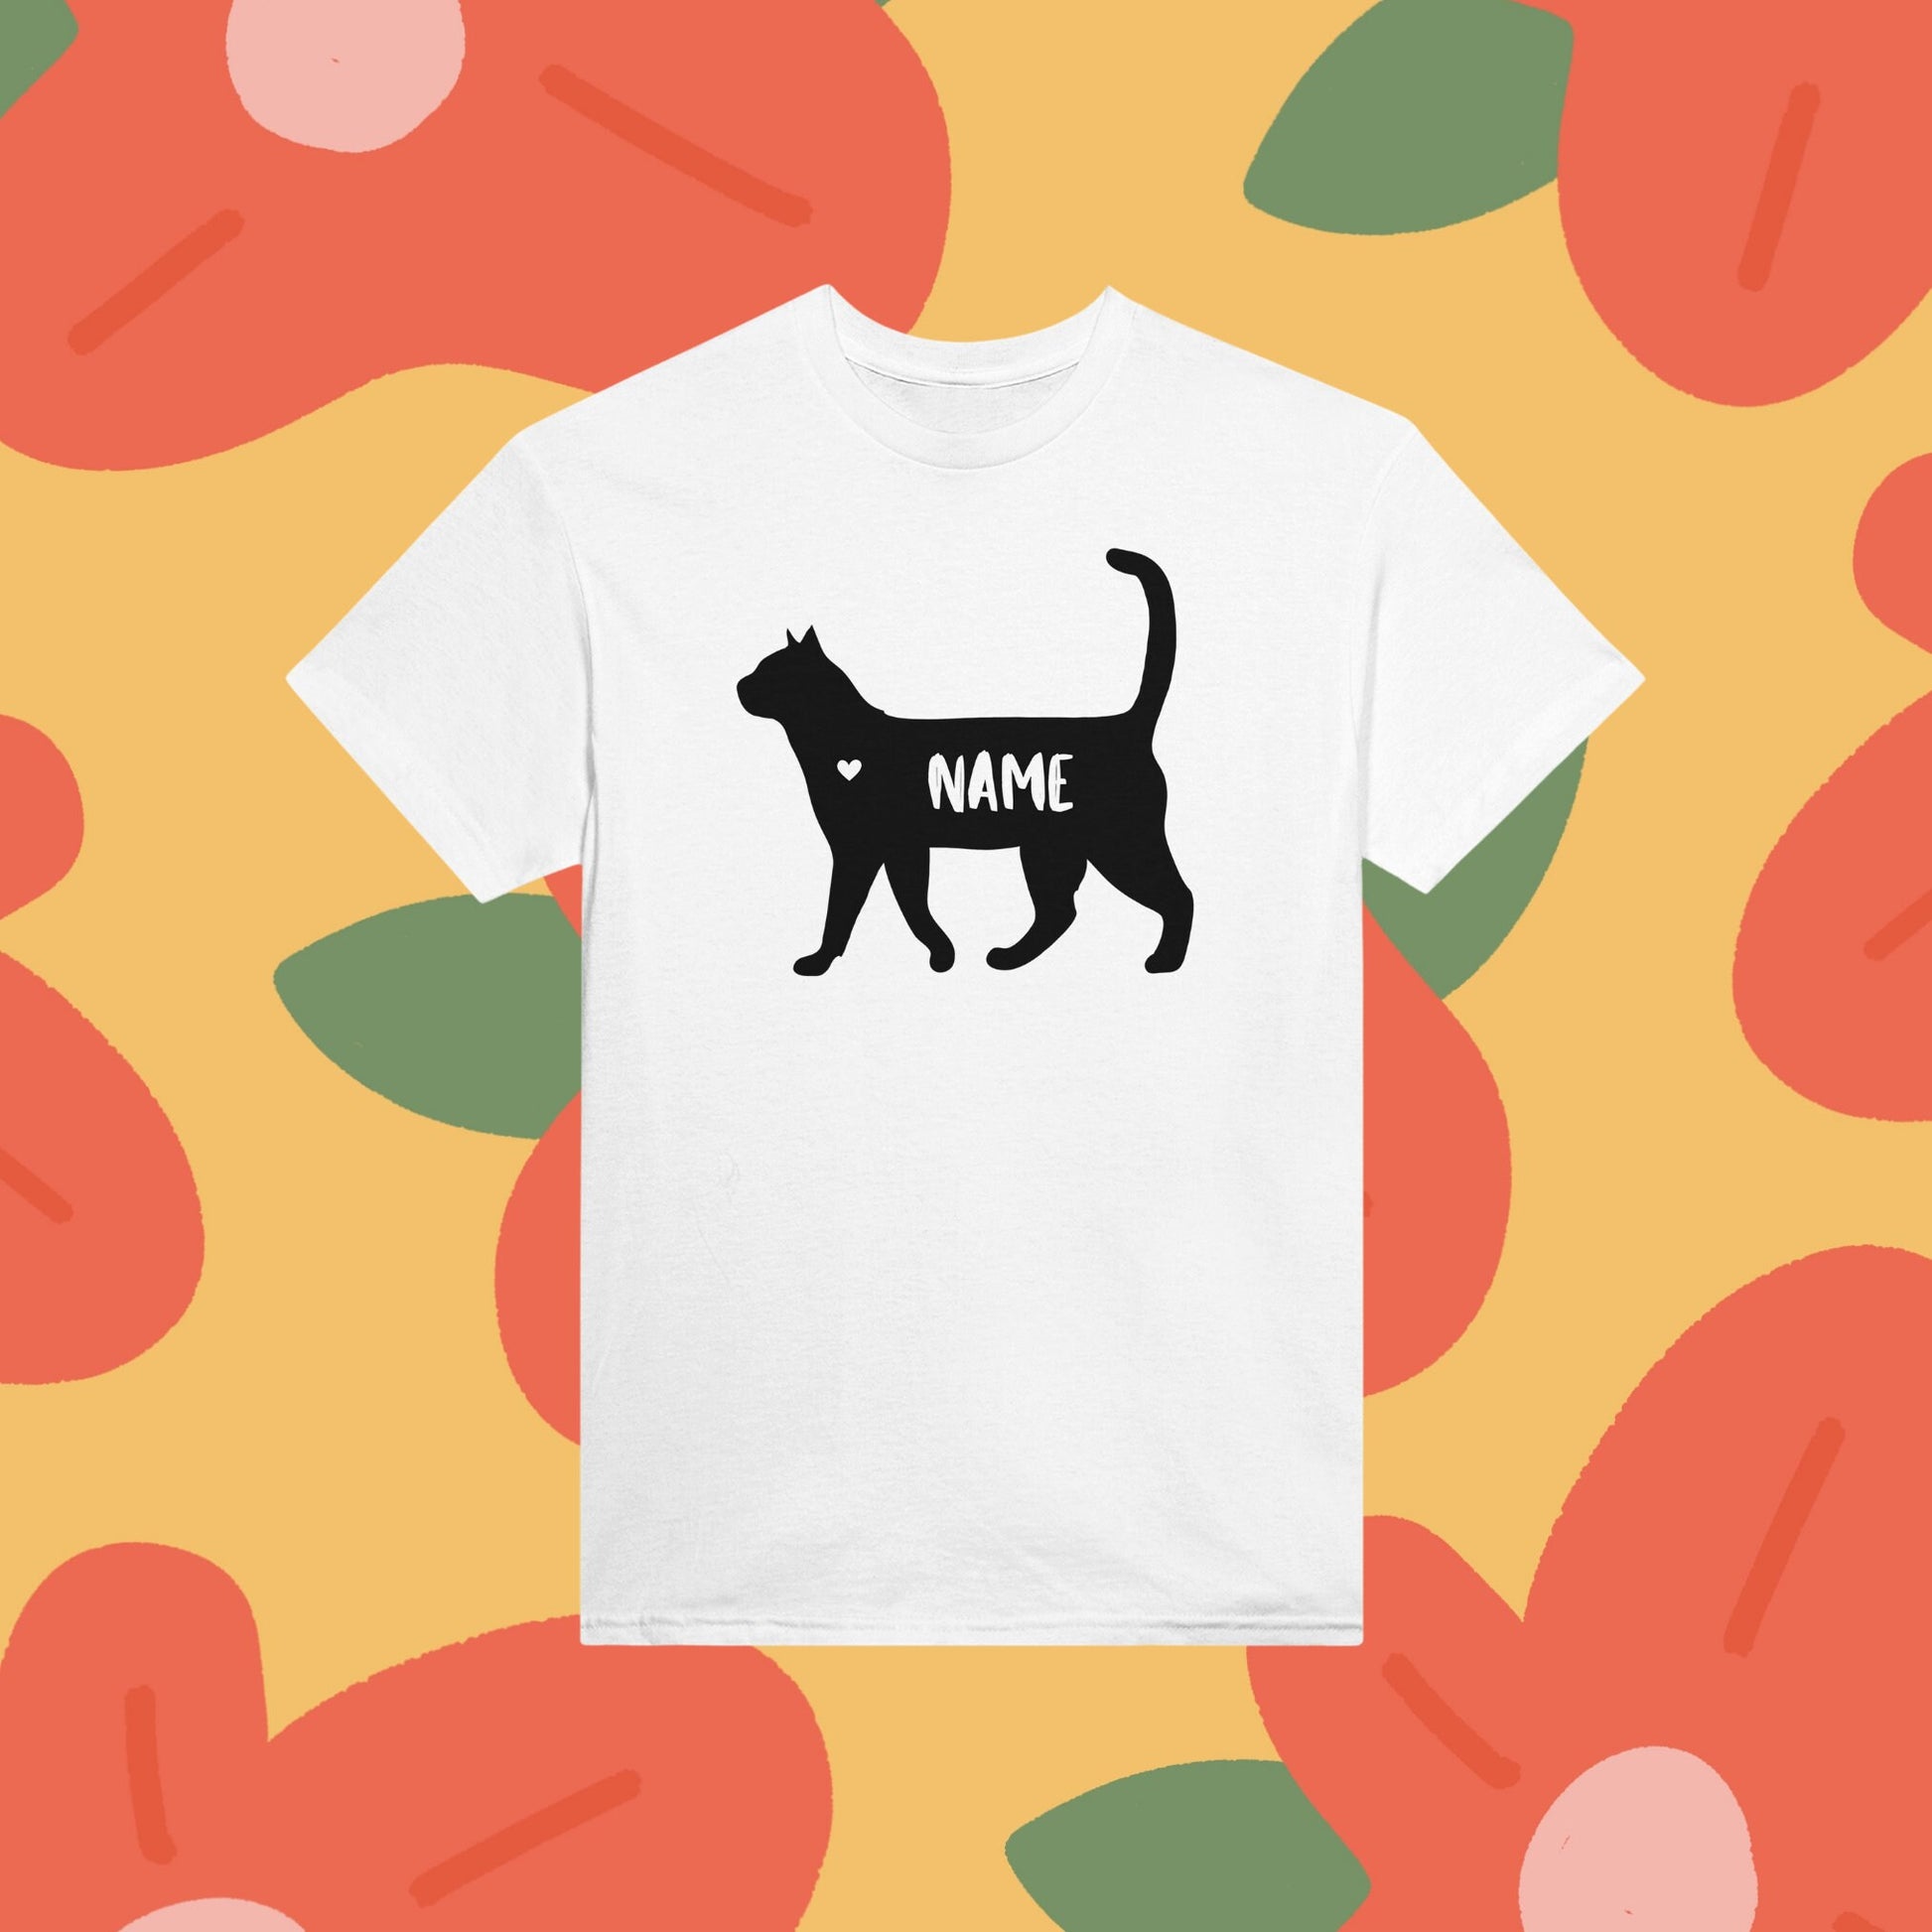 Personalized Cat Silhouette T-Shirt - Customize with Your Cat's Name! , Cat Silhouette, Cat Obsessed, Crazy Cat Lady